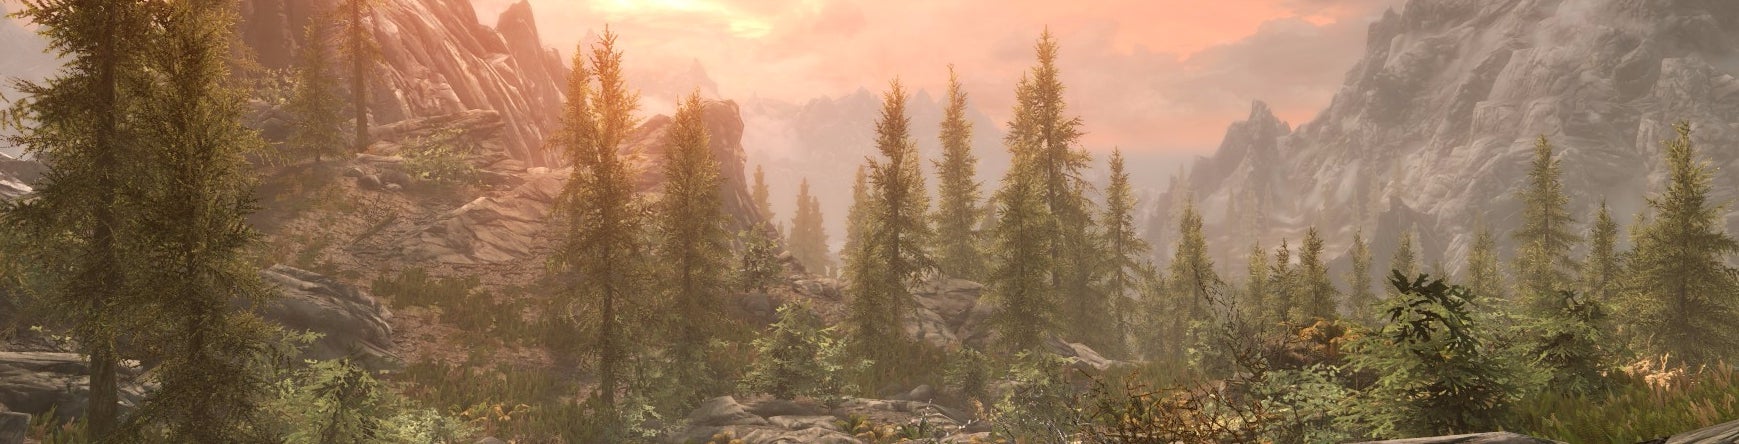 Image for Skyrim on Xbox One X gets the job done - but we expected more